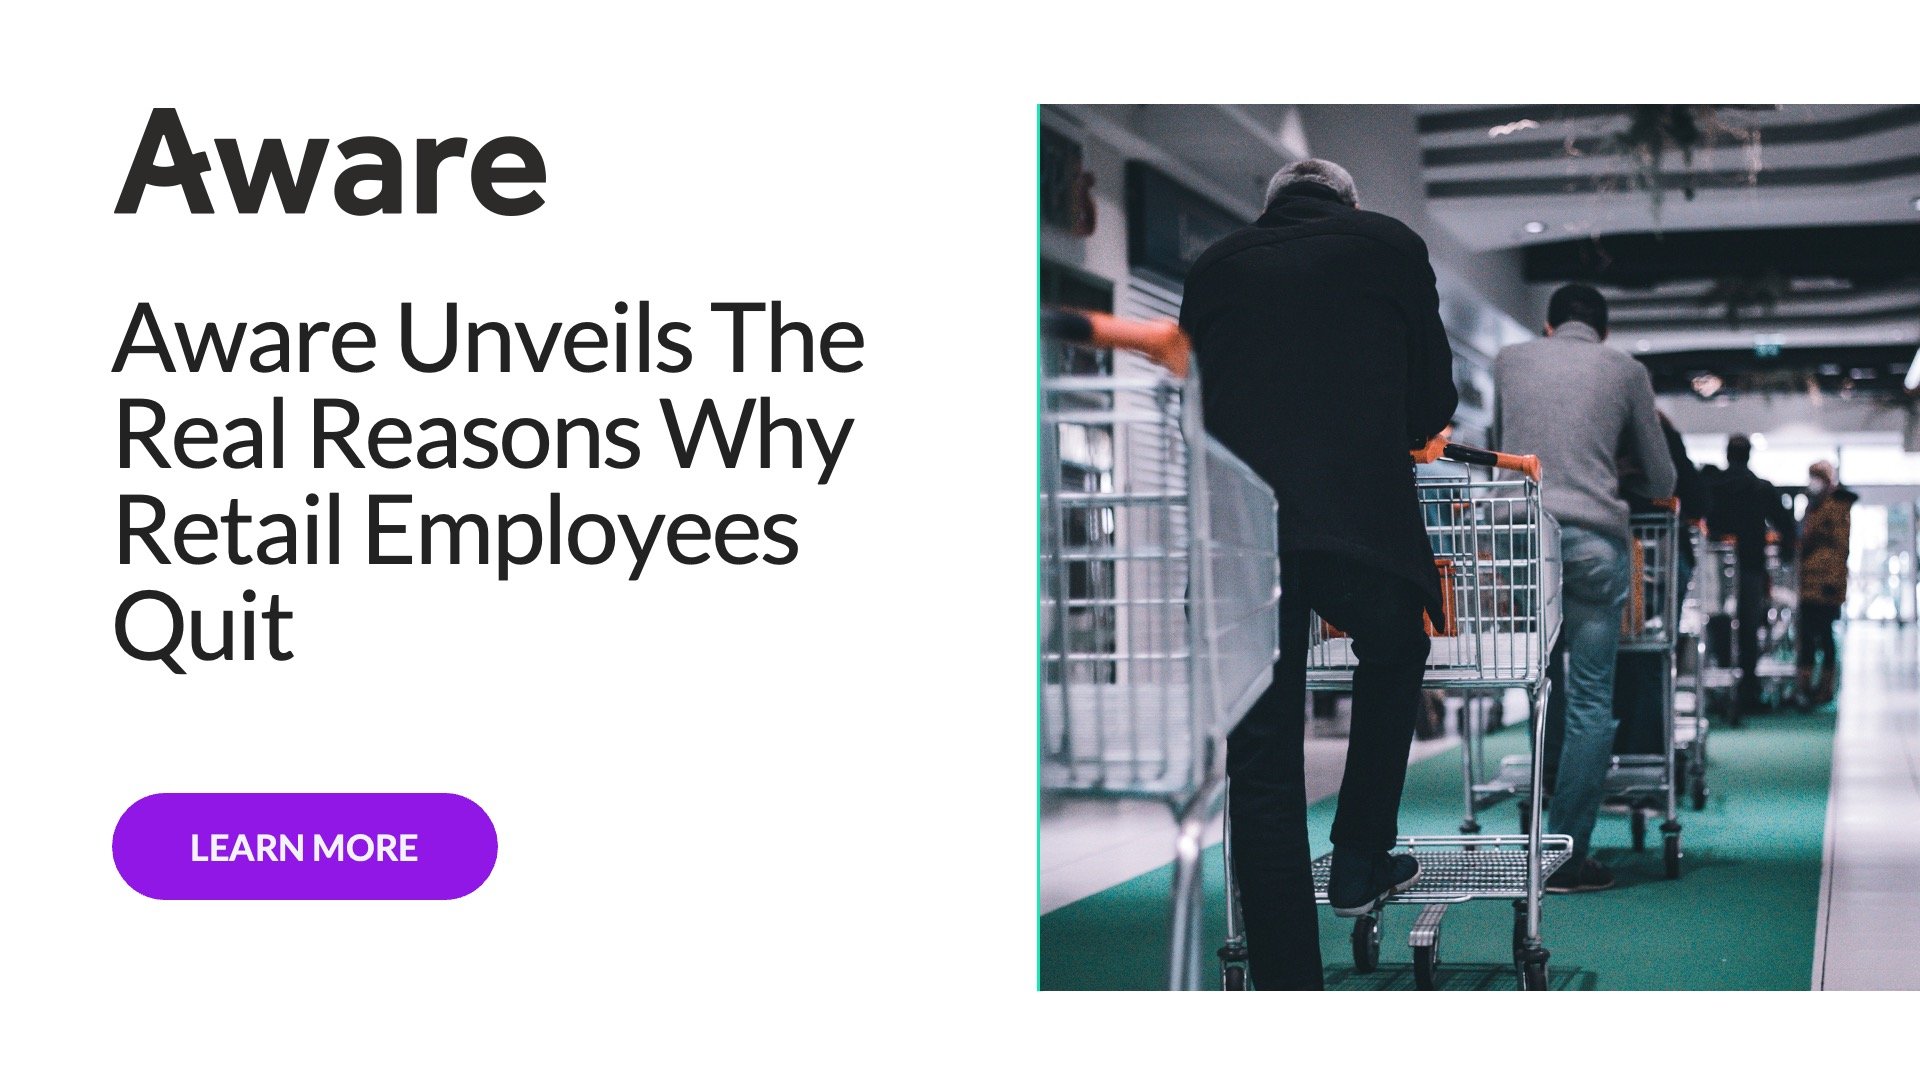 Aware Unveils The Real Reasons Why Retail Employees Quit